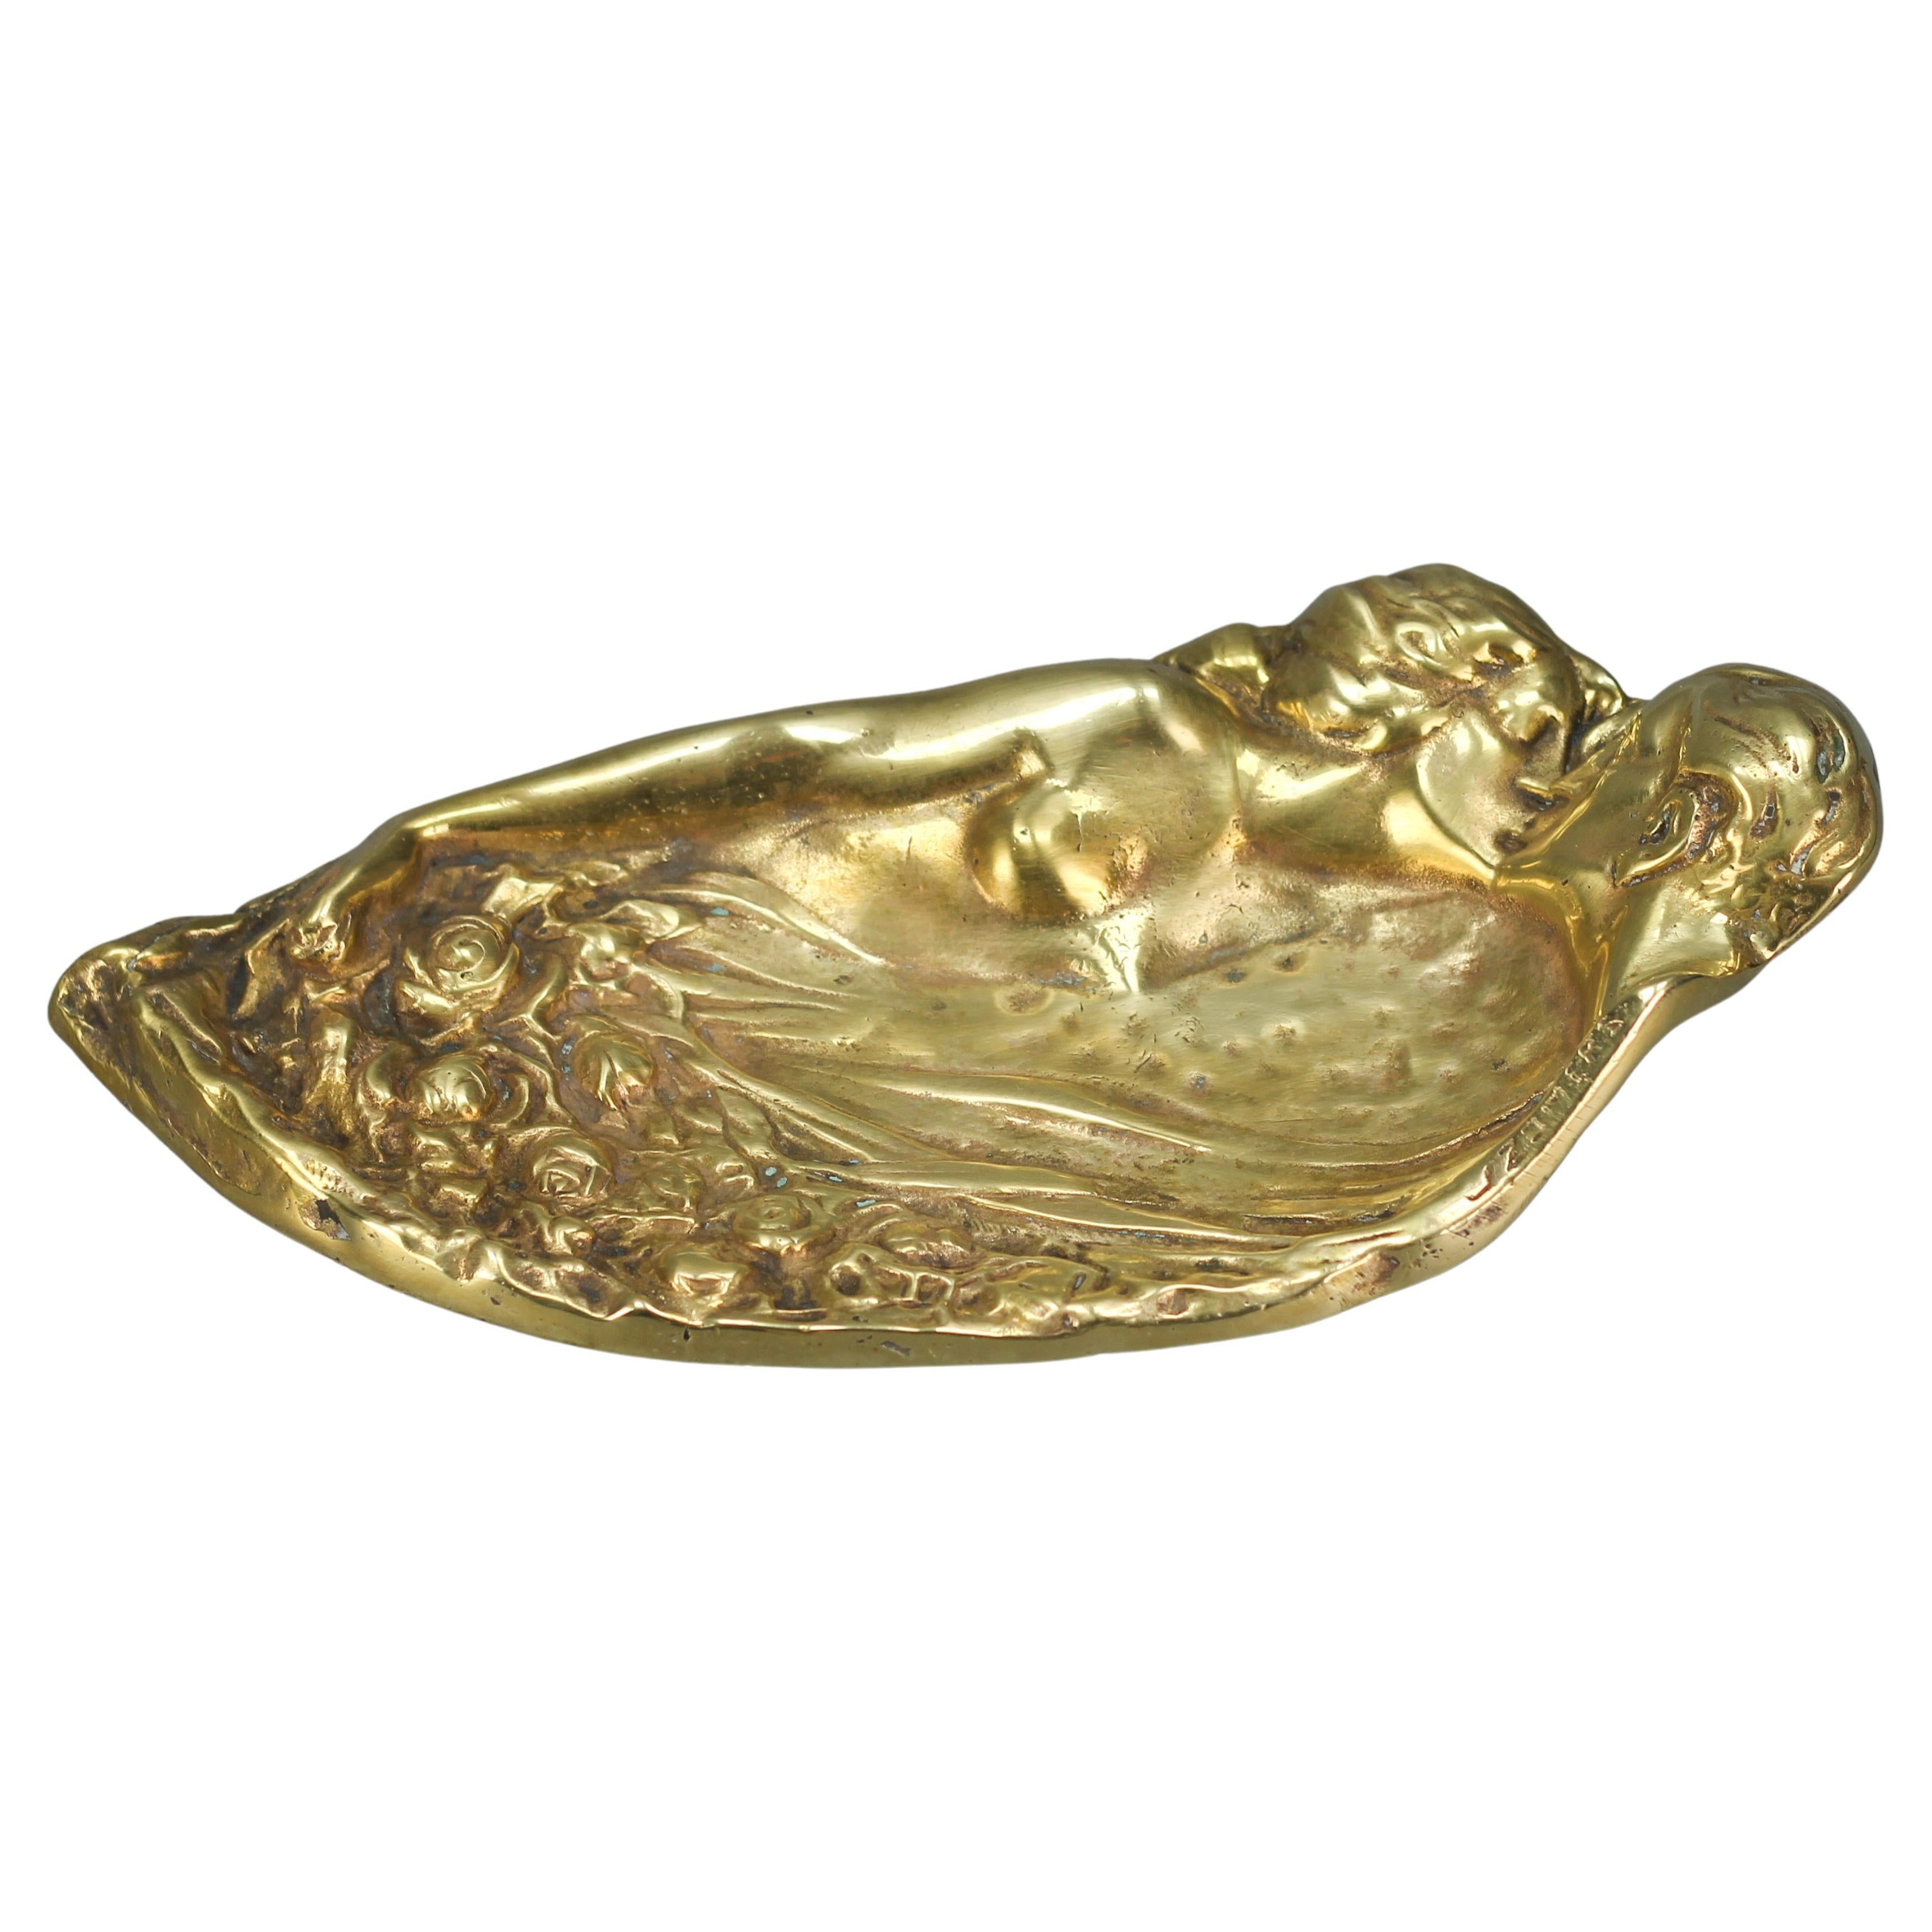 Bronze Tray or Vide-Poche with Motif of a Kissing Couple by Joseph Zomers